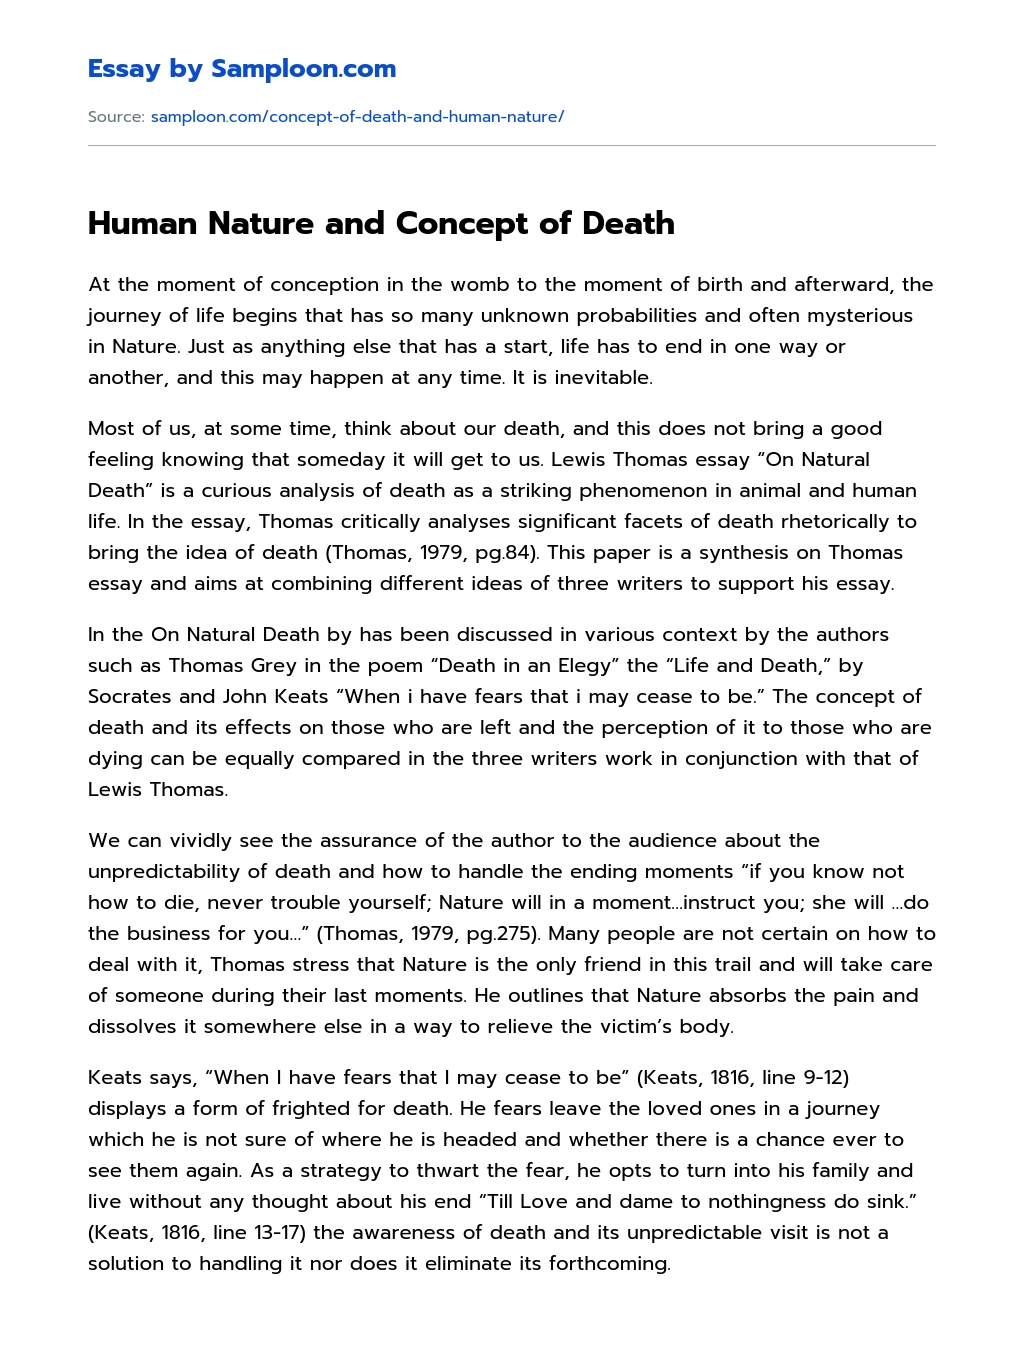 Human Nature and Concept of Death Summary essay